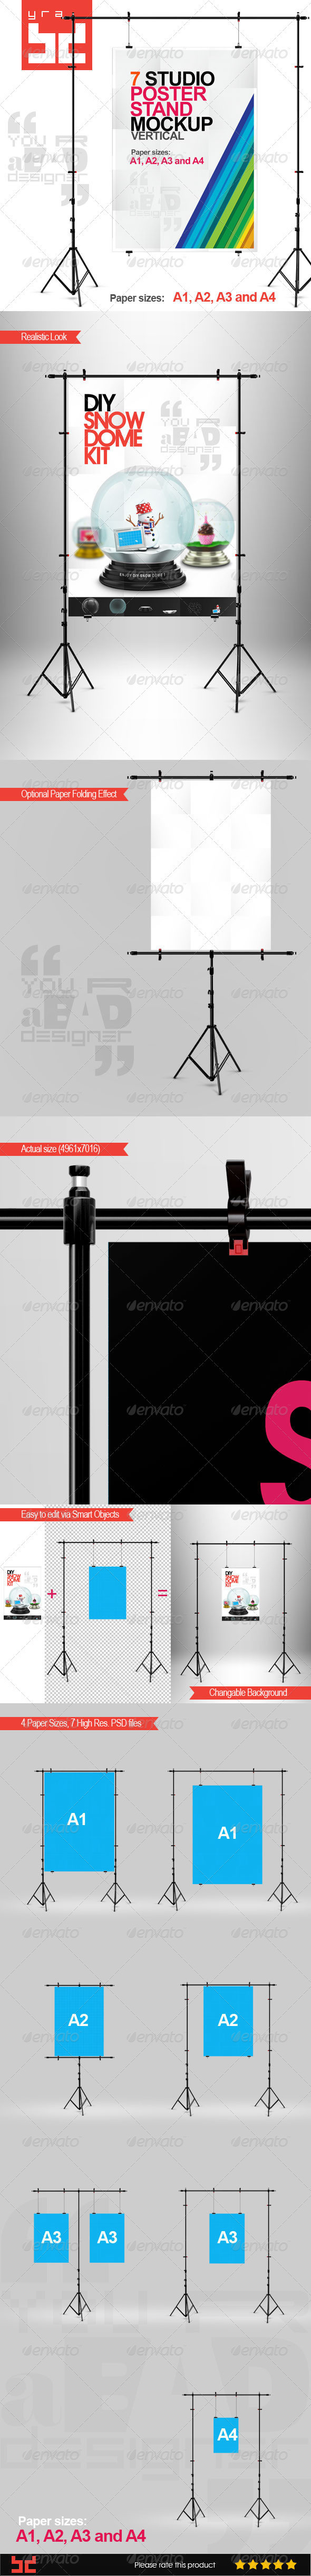 Poster stand vertical mockup